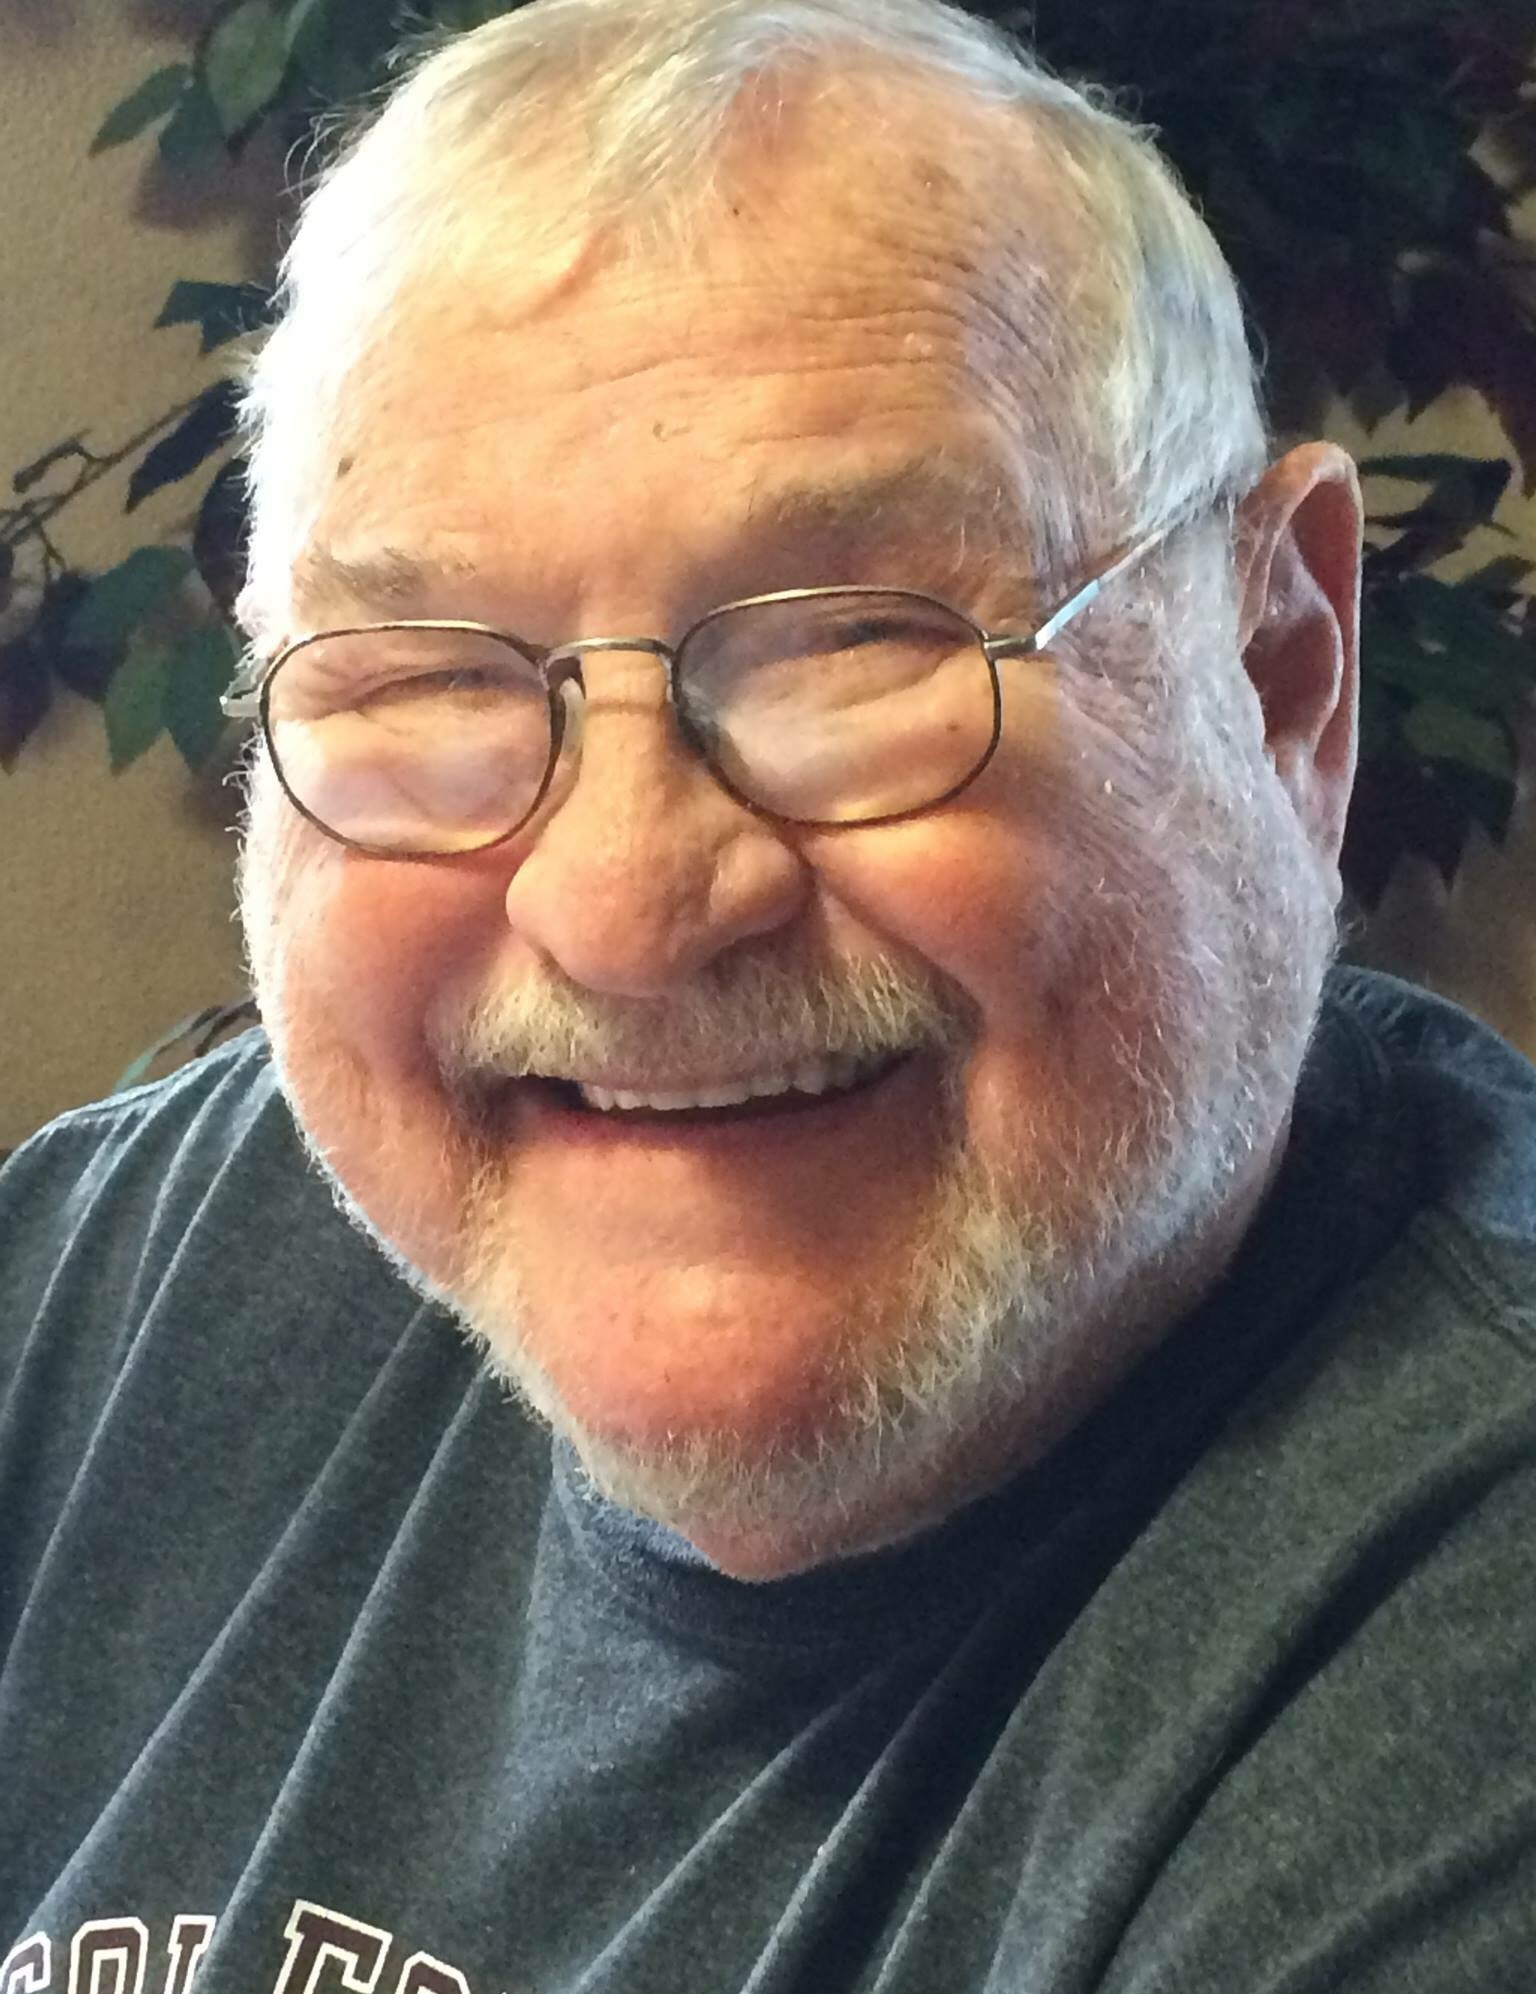 Donald Donnie Wilson Obituary - Visitation & Funeral Information